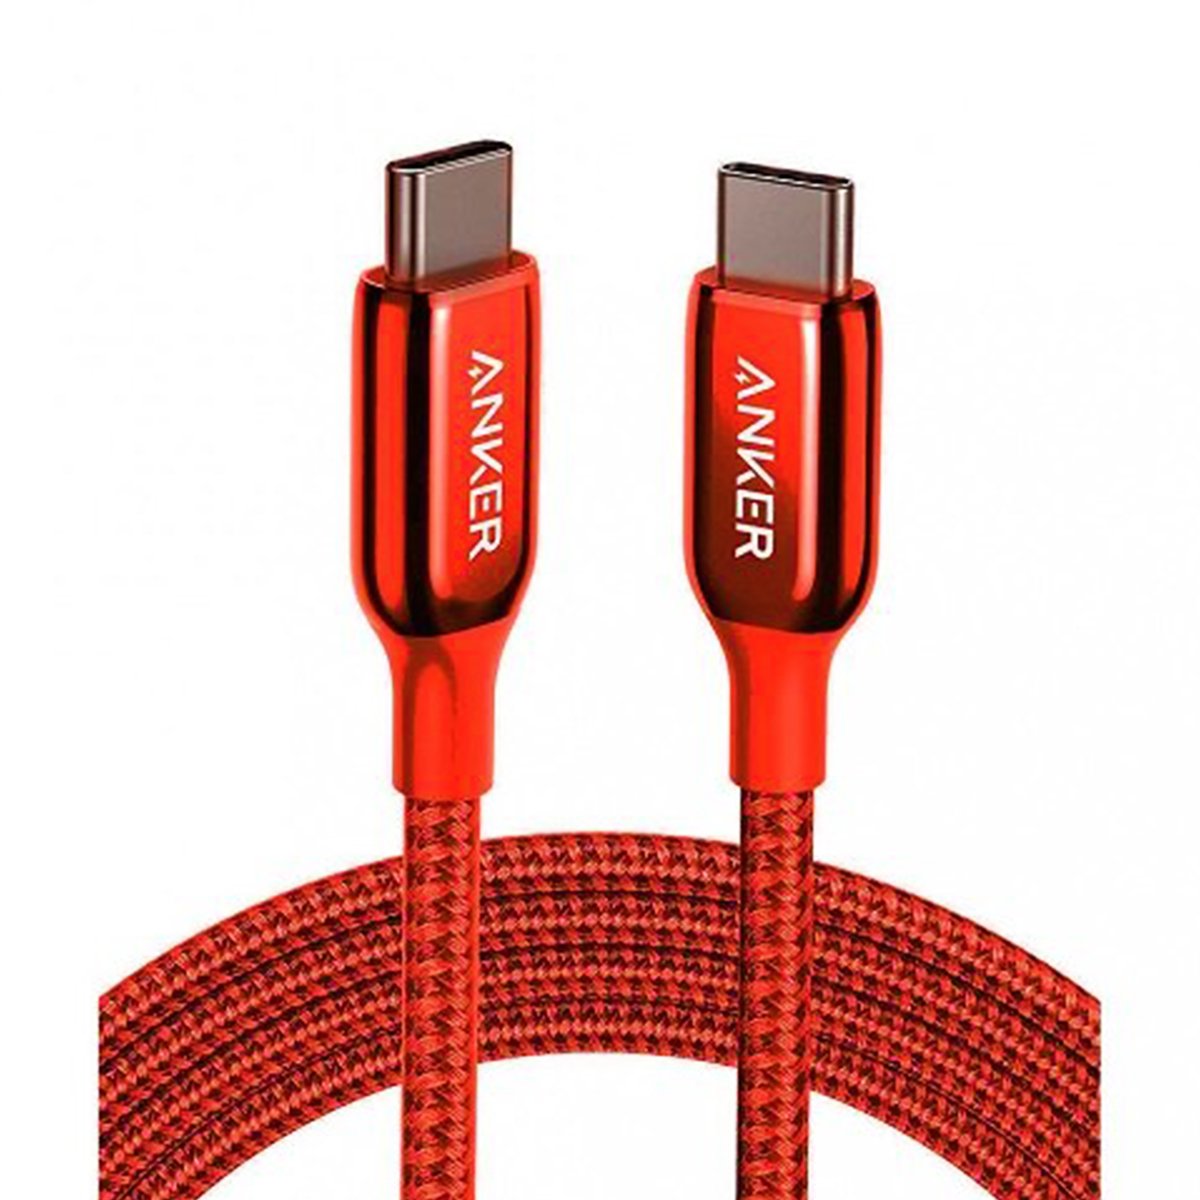 Anker PowerLine+ III USB-C to USB-C Cable A8863H91 Red 1.8mtr